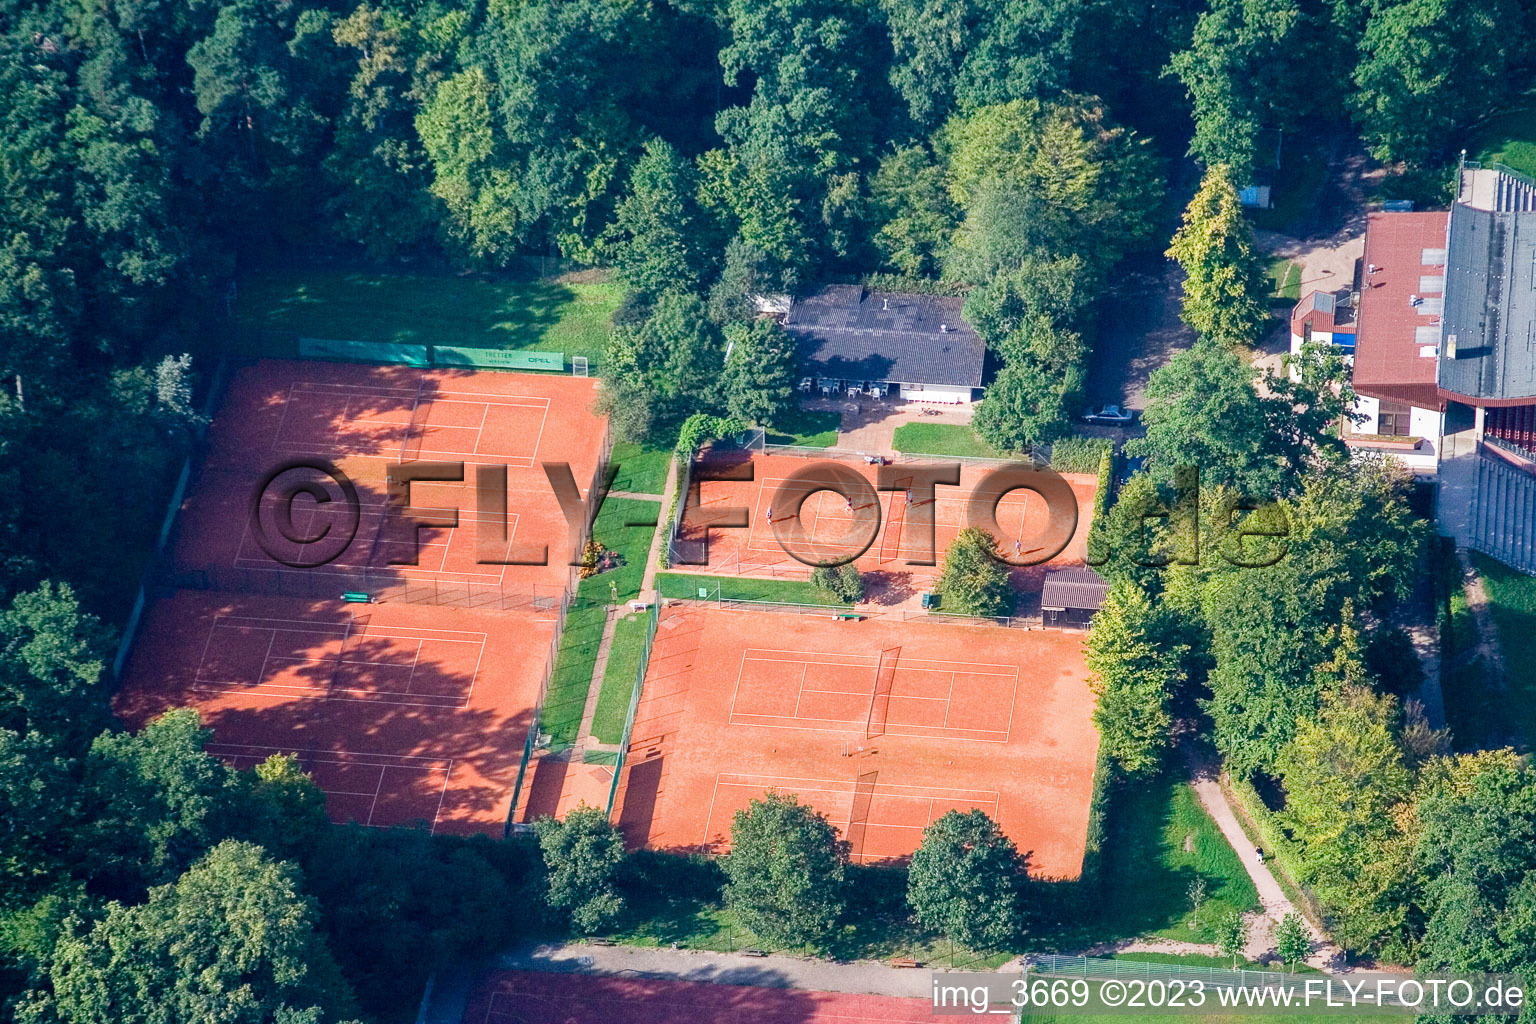 Tennis club in Kandel in the state Rhineland-Palatinate, Germany